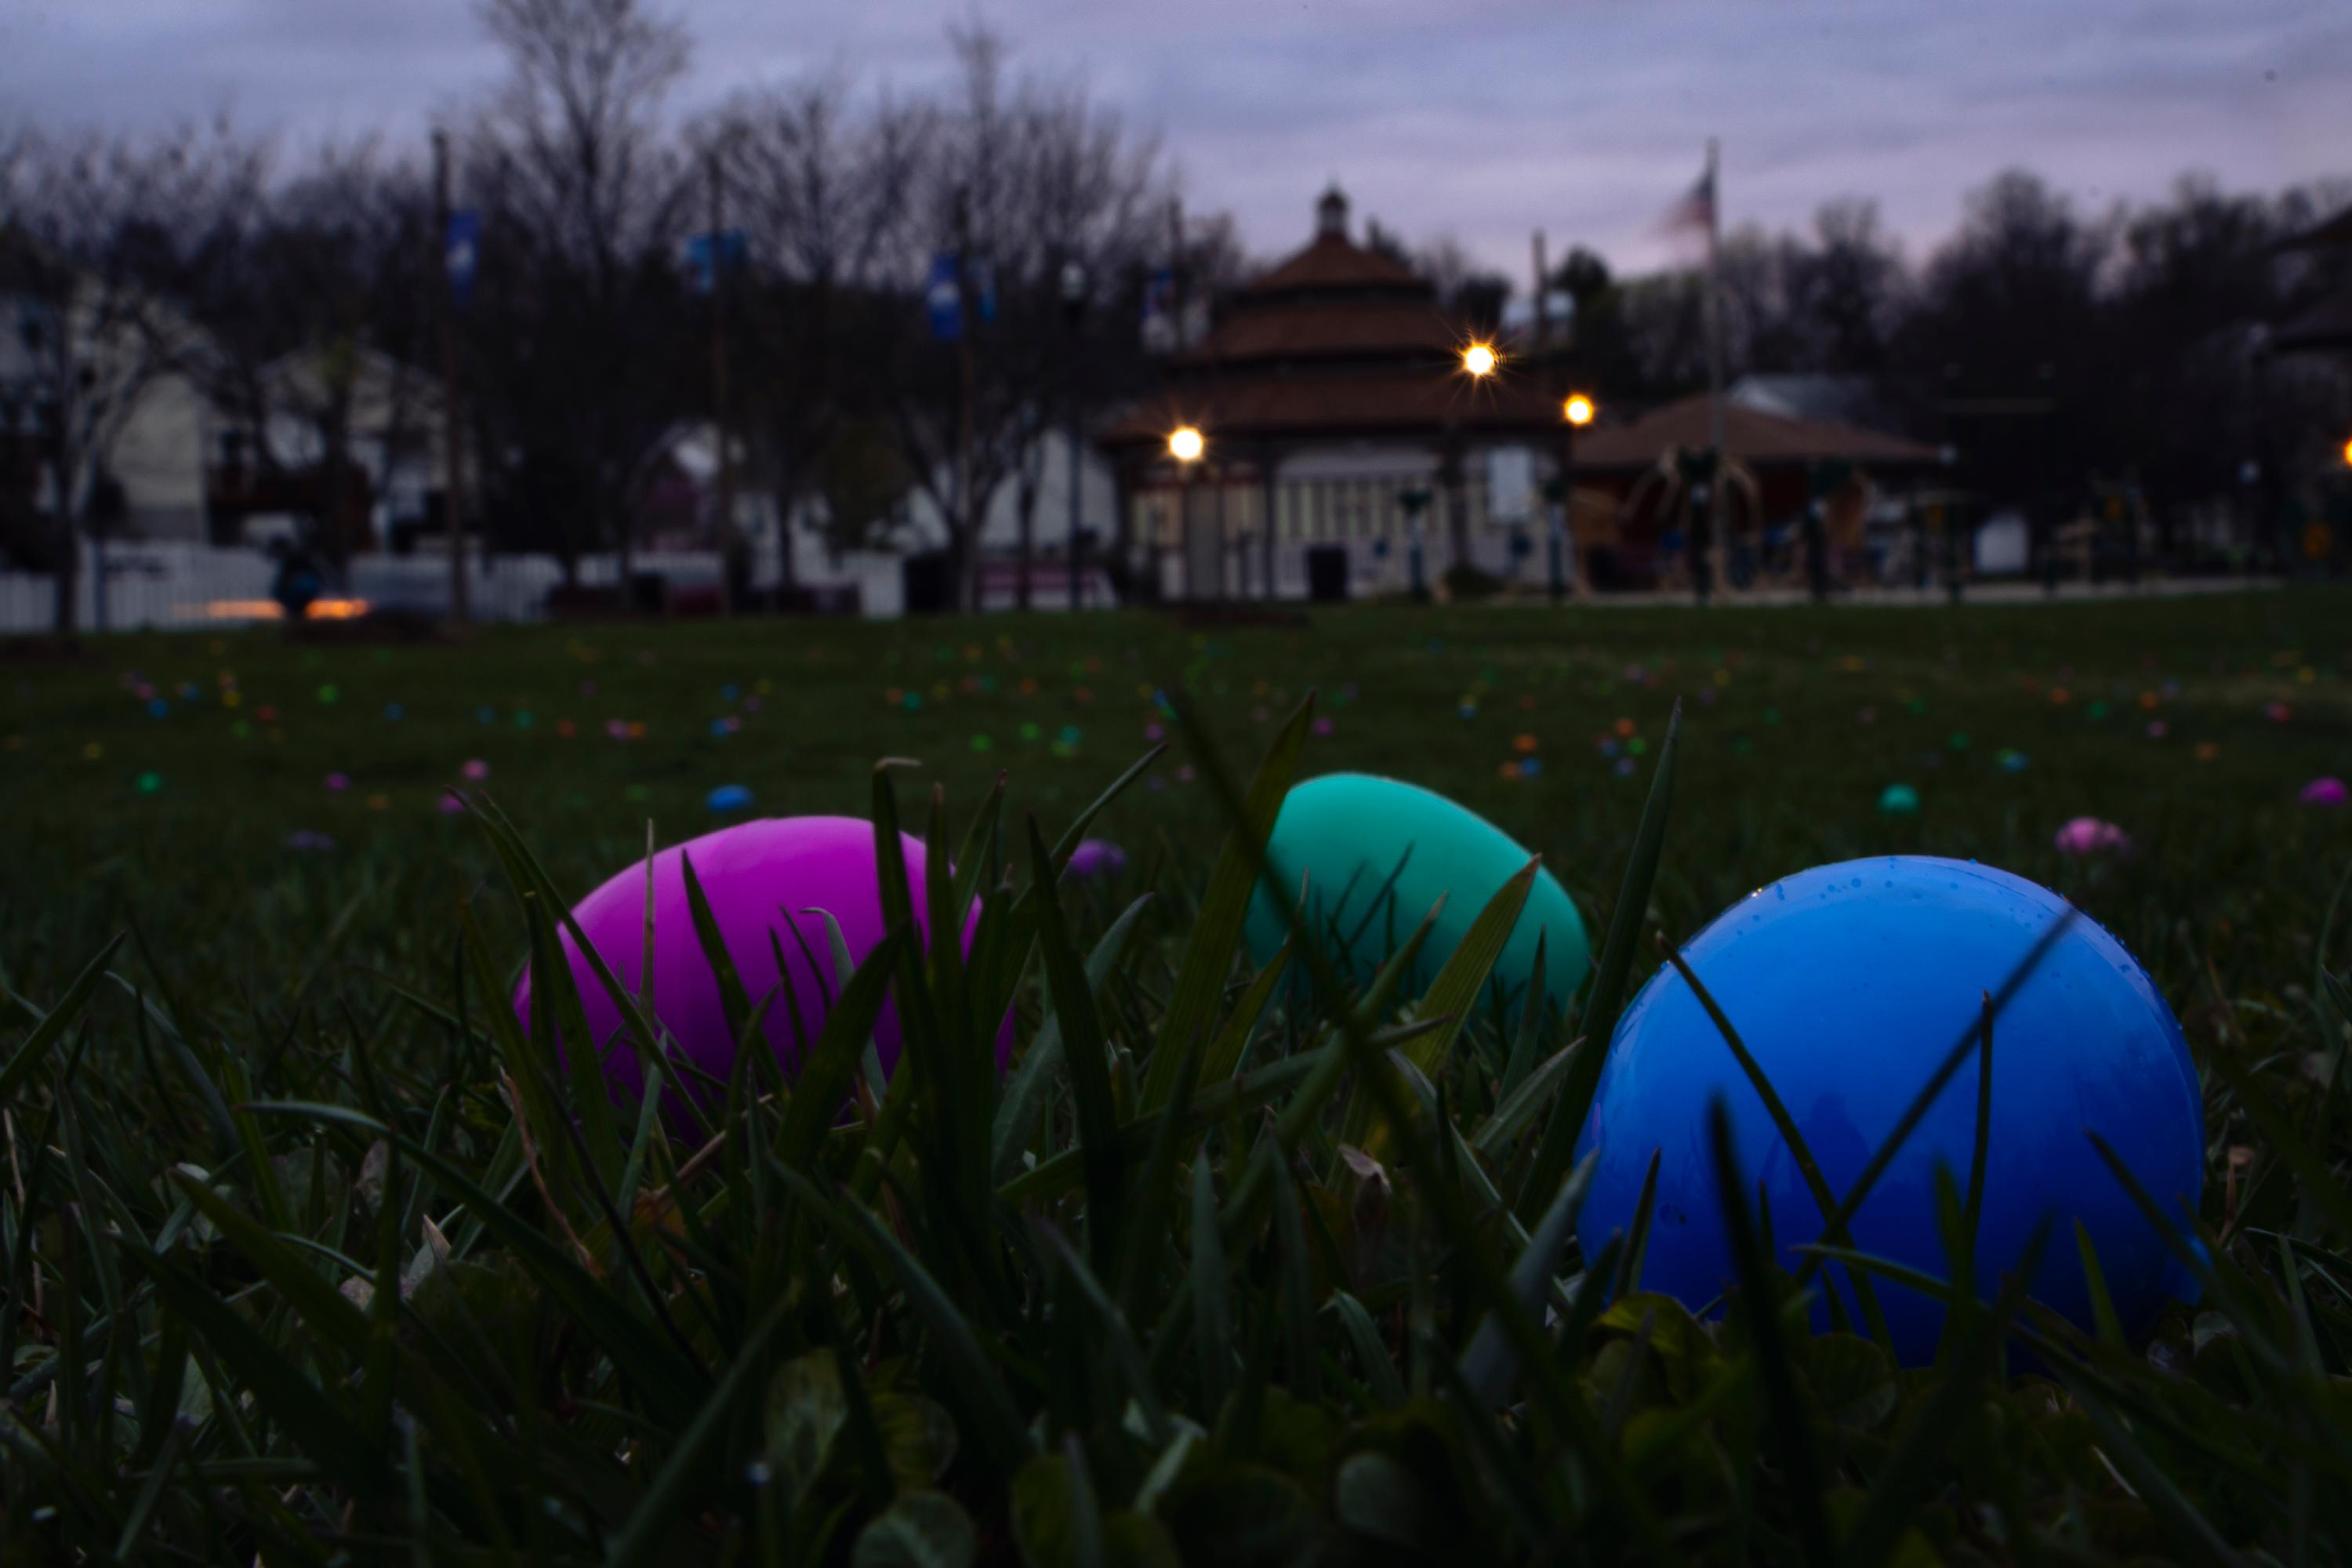 plastic eggs in a field at dusk